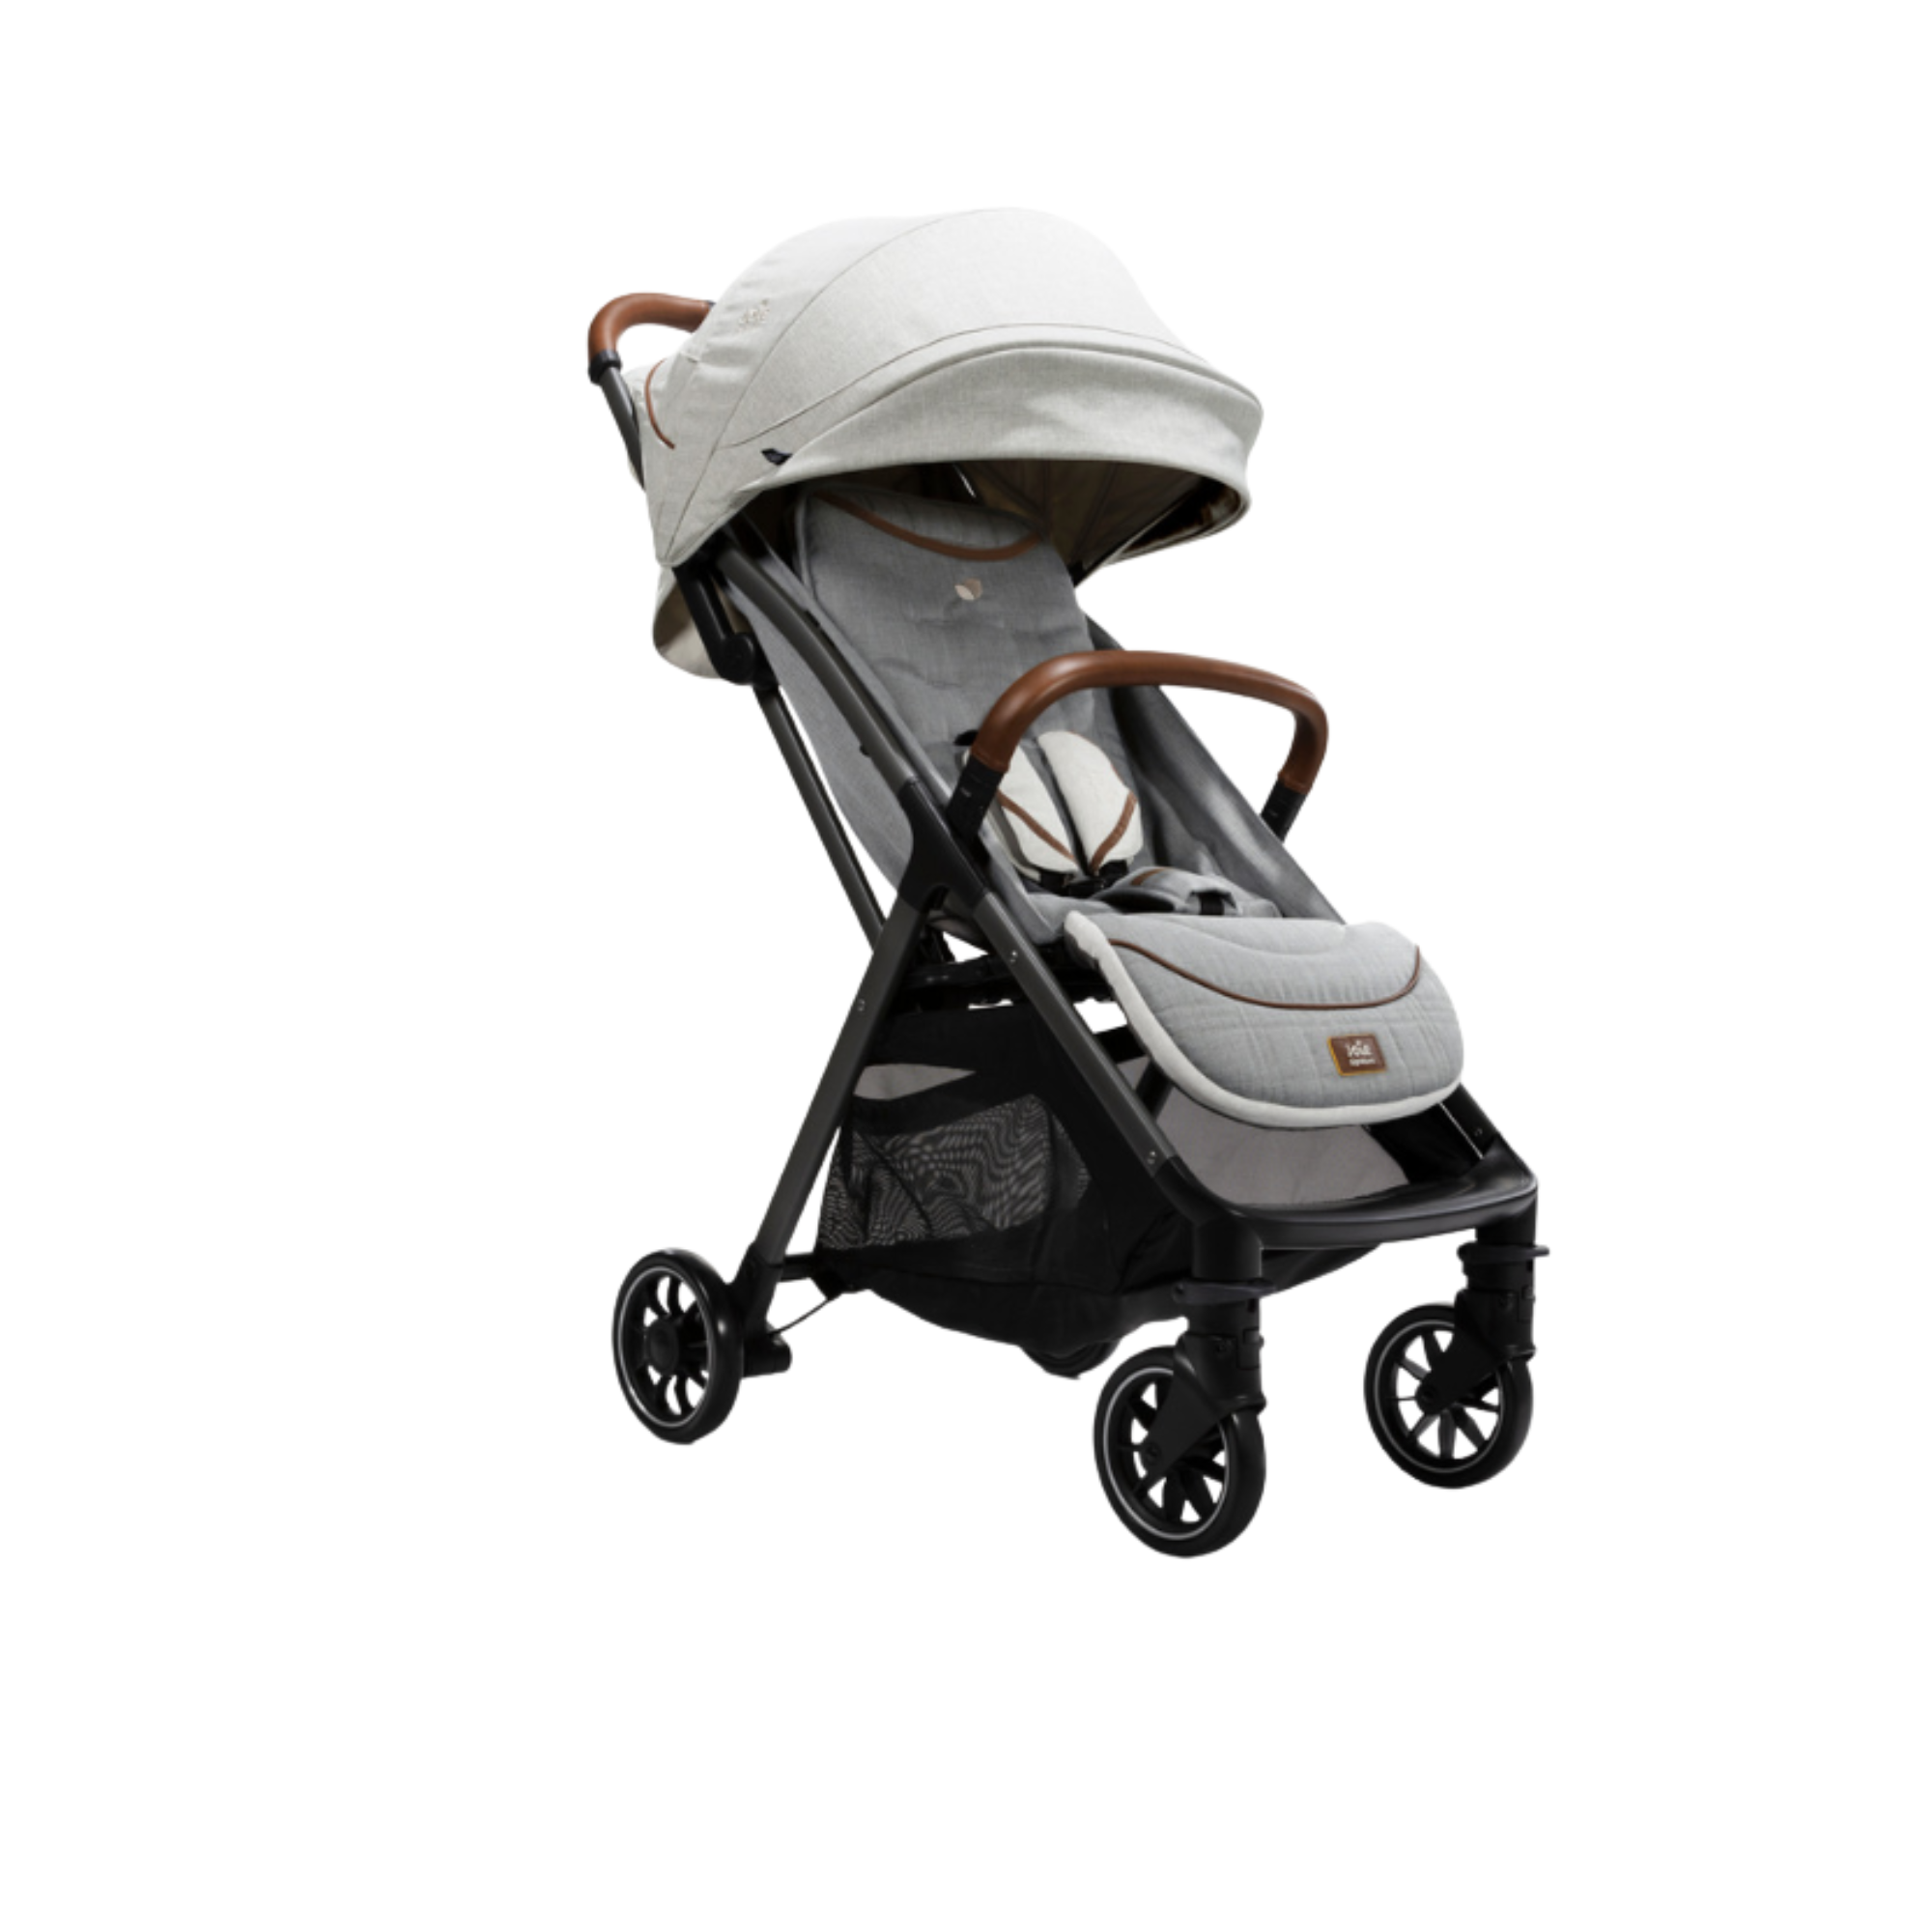 Carucior sport ultracompact Parcel, nastere - 22 kg, Signature Oyster, Joie 538980